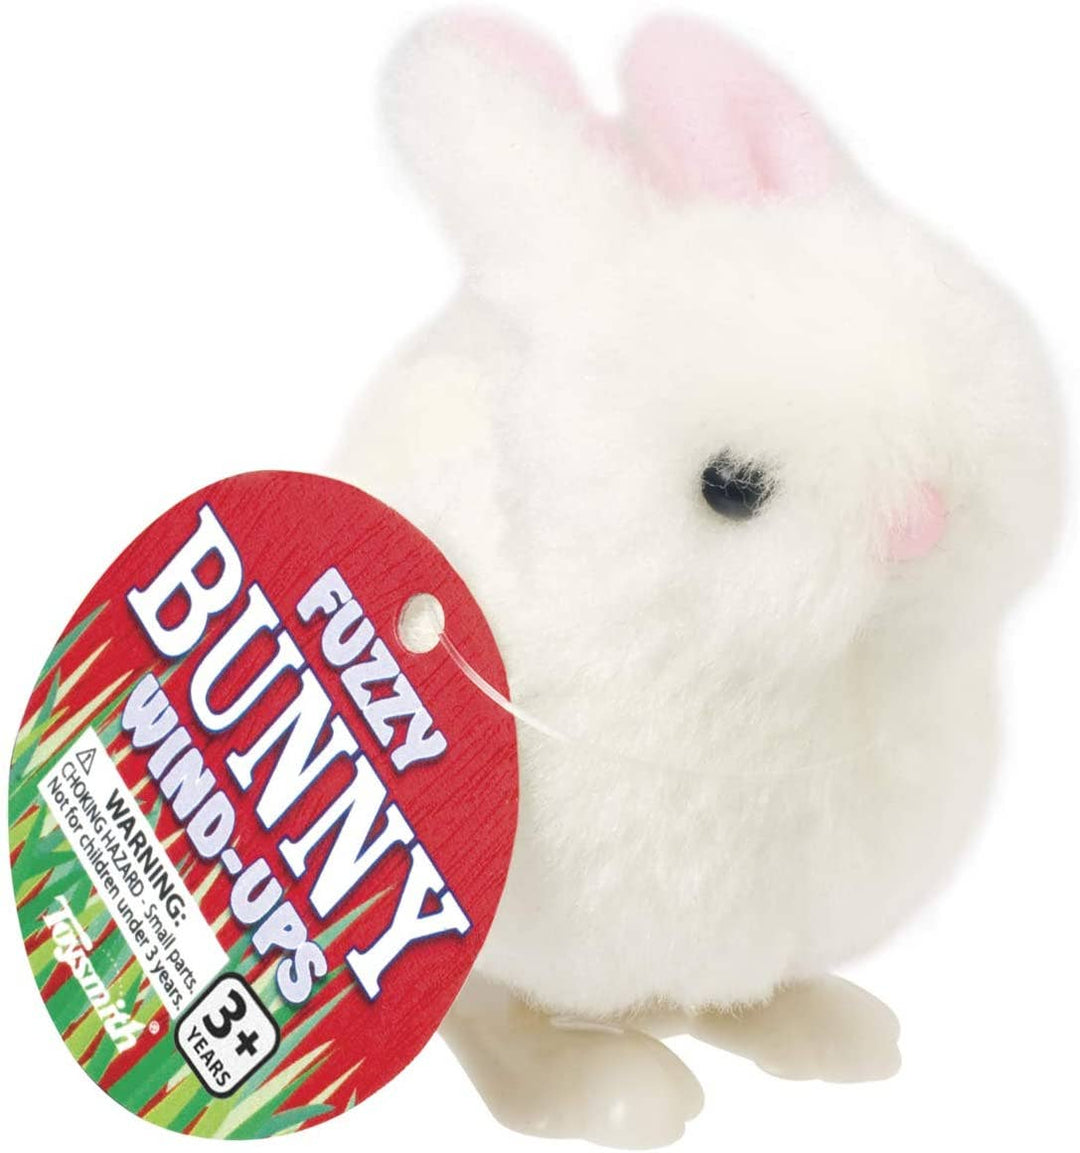 Fuzzy Bunny Wind Up Toy Bonjour Fete Party Supplies Easter Gifts & Basket Fillers